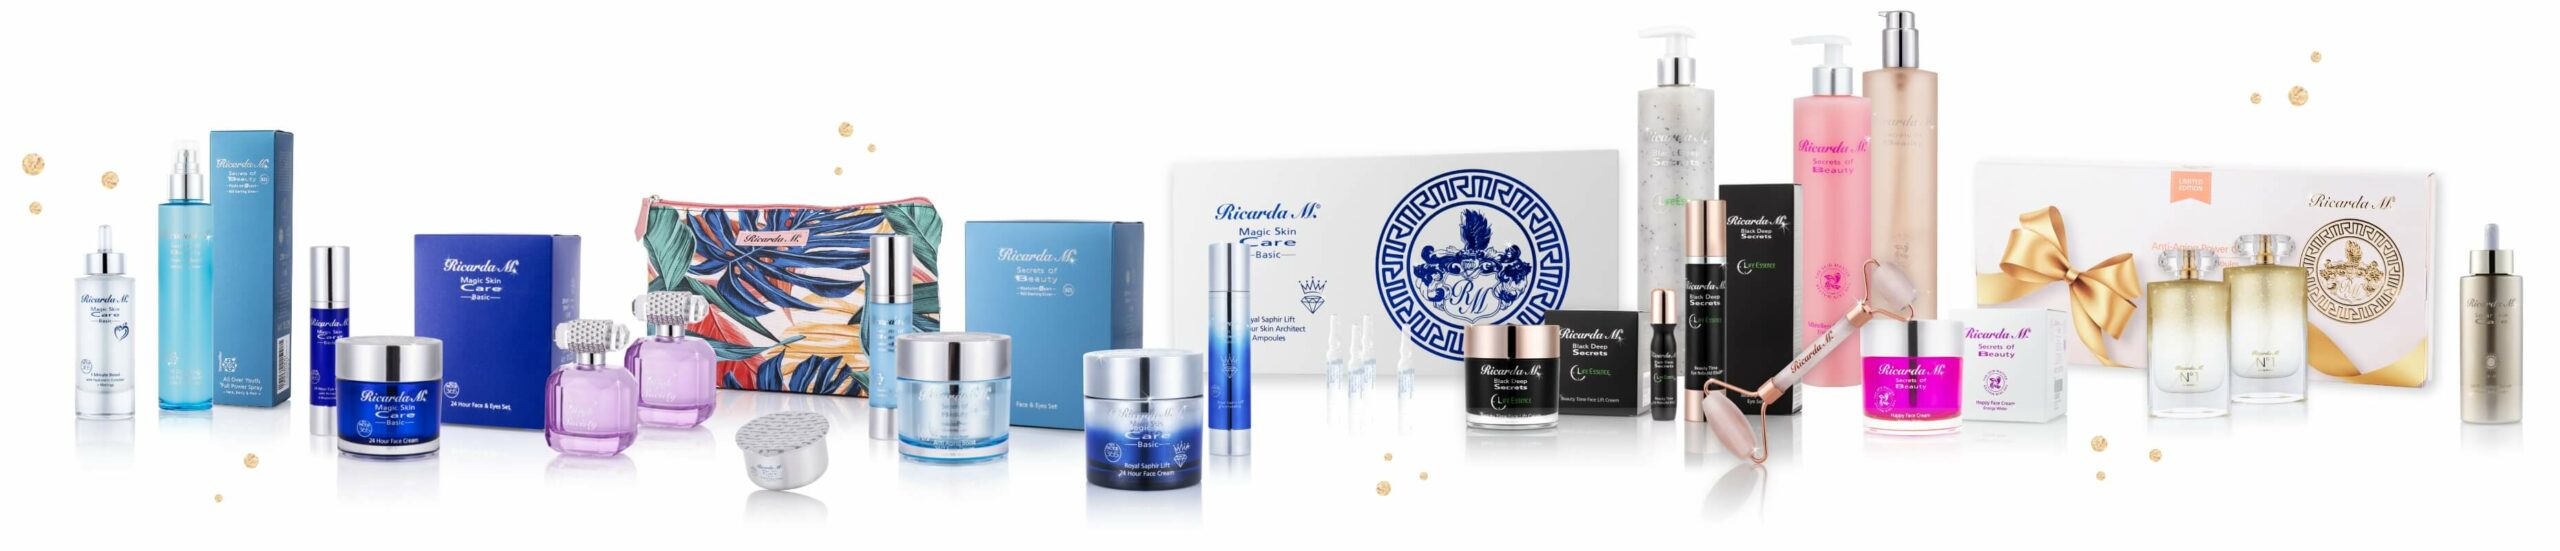 Cosmetic products from Ricarda M.